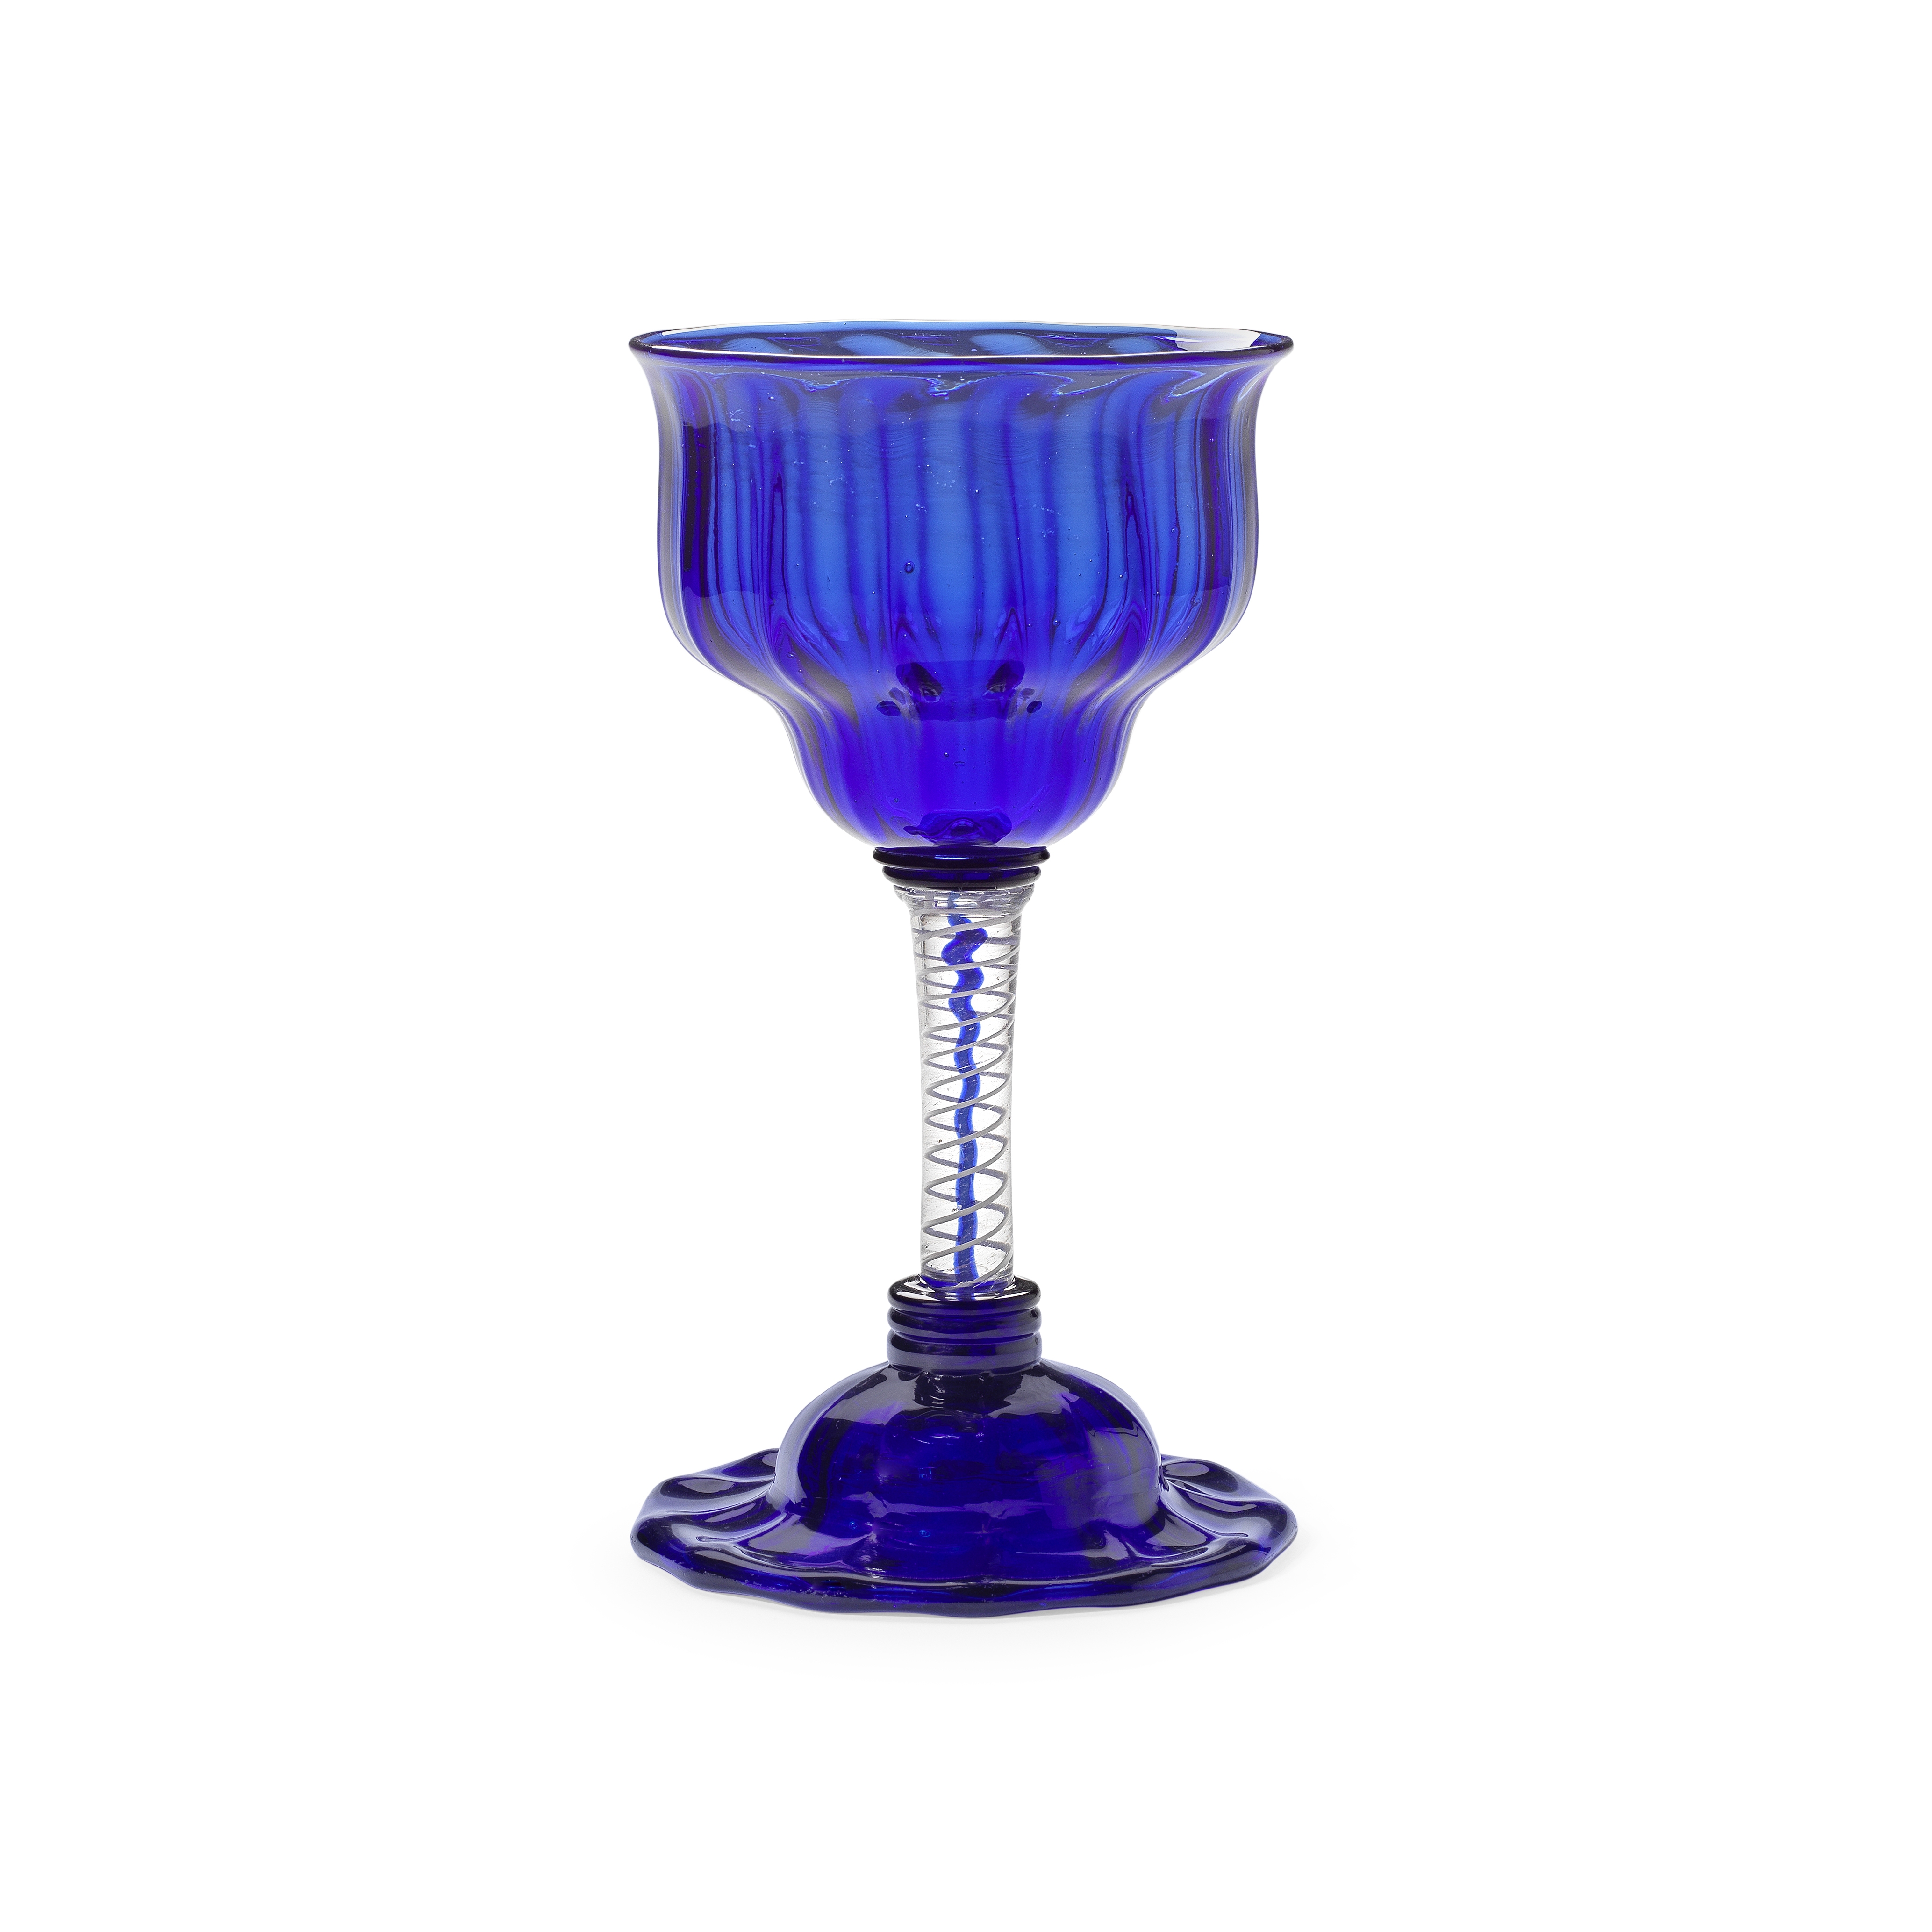 An exceptional blue colour twist sweetmeat or champagne glass, circa 1765